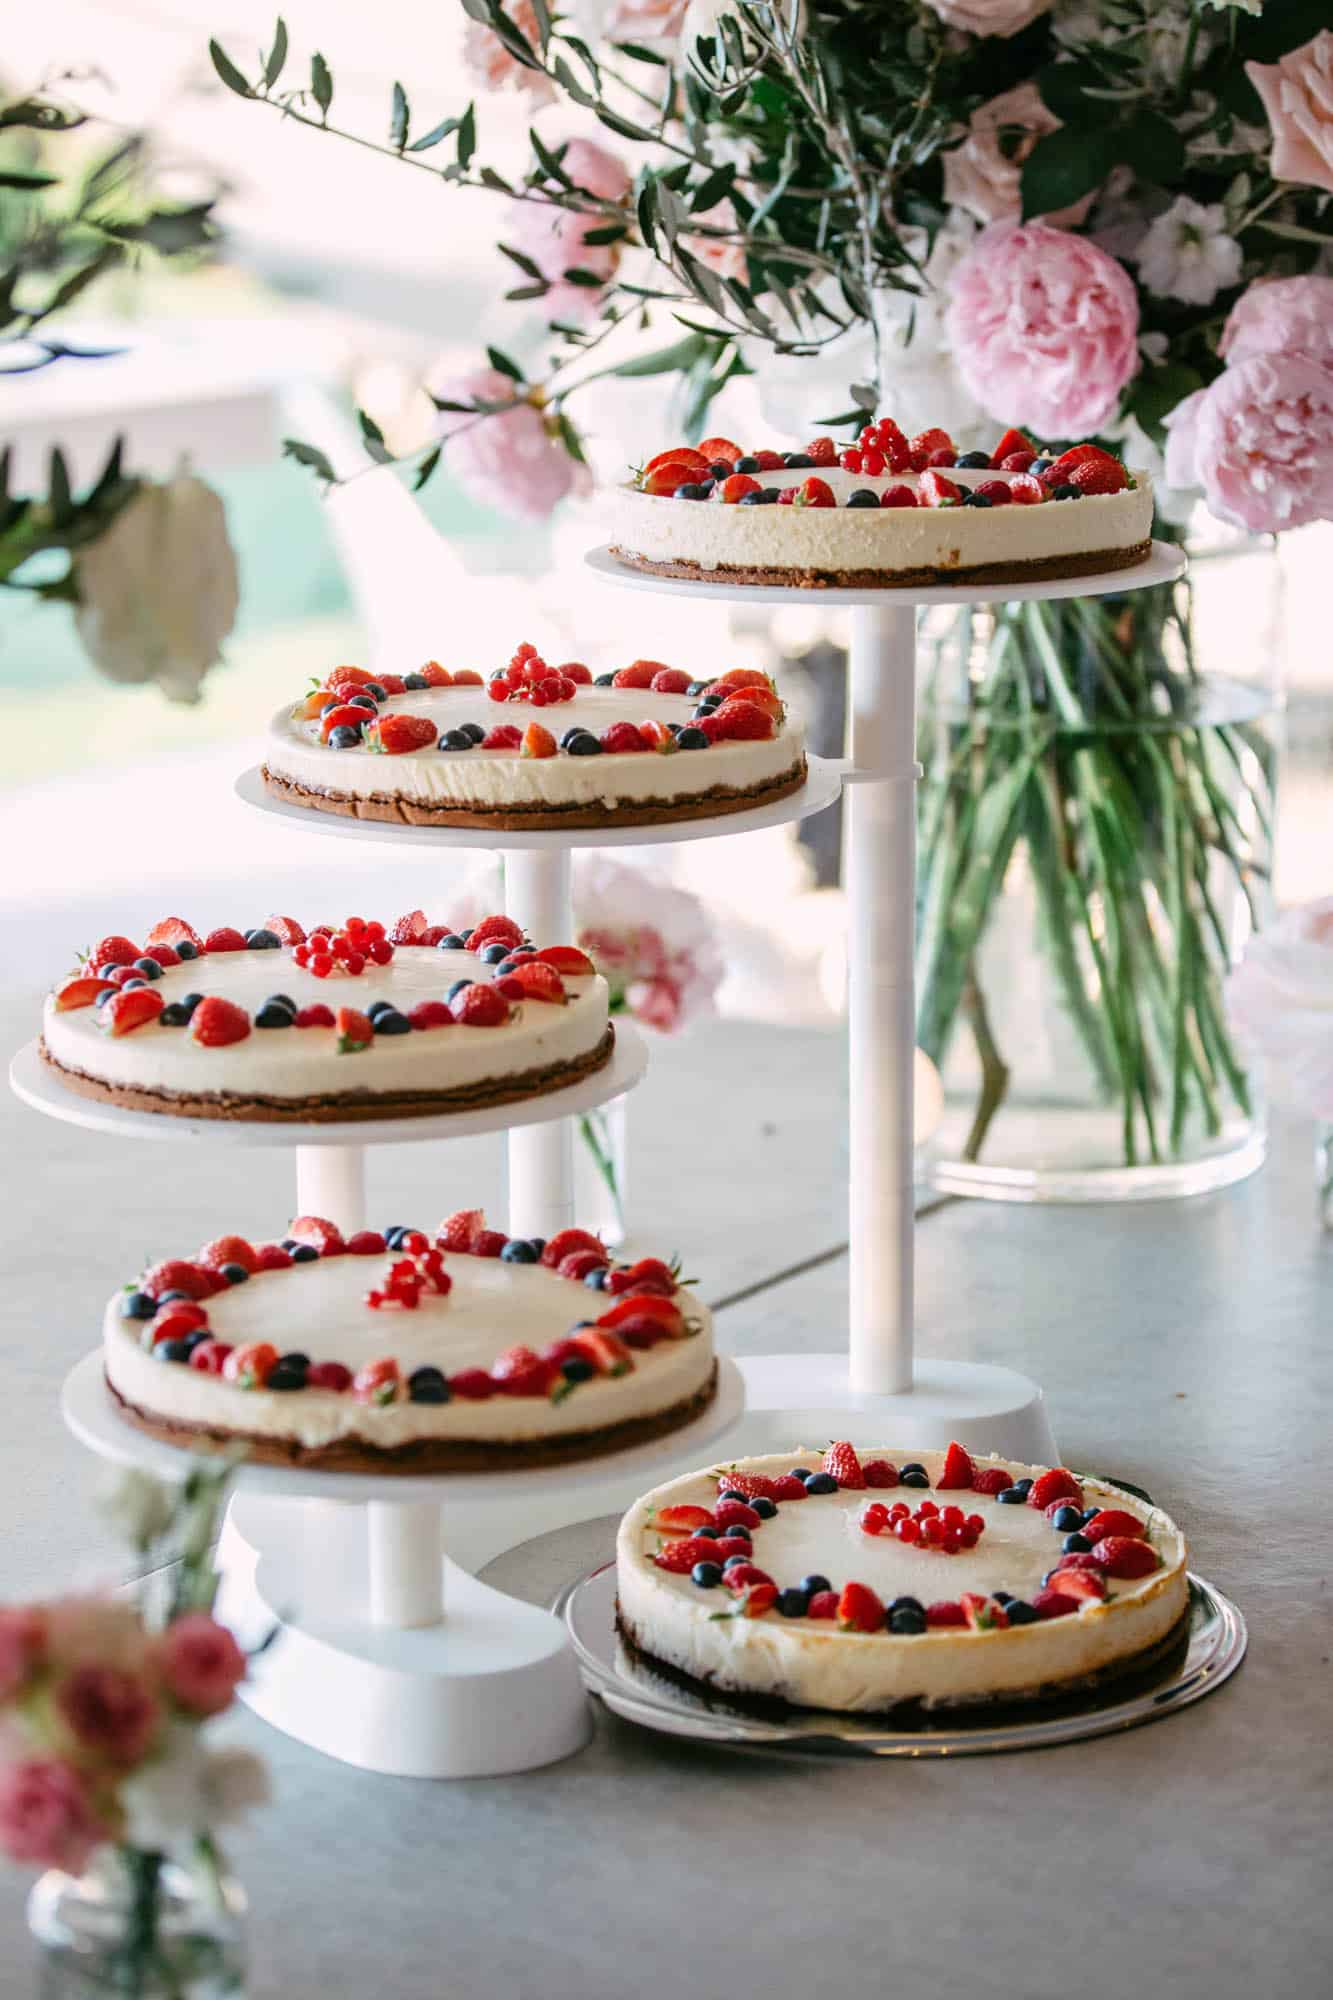 Three layers of cheesecakes on a table with beautiful wedding cake flowers.